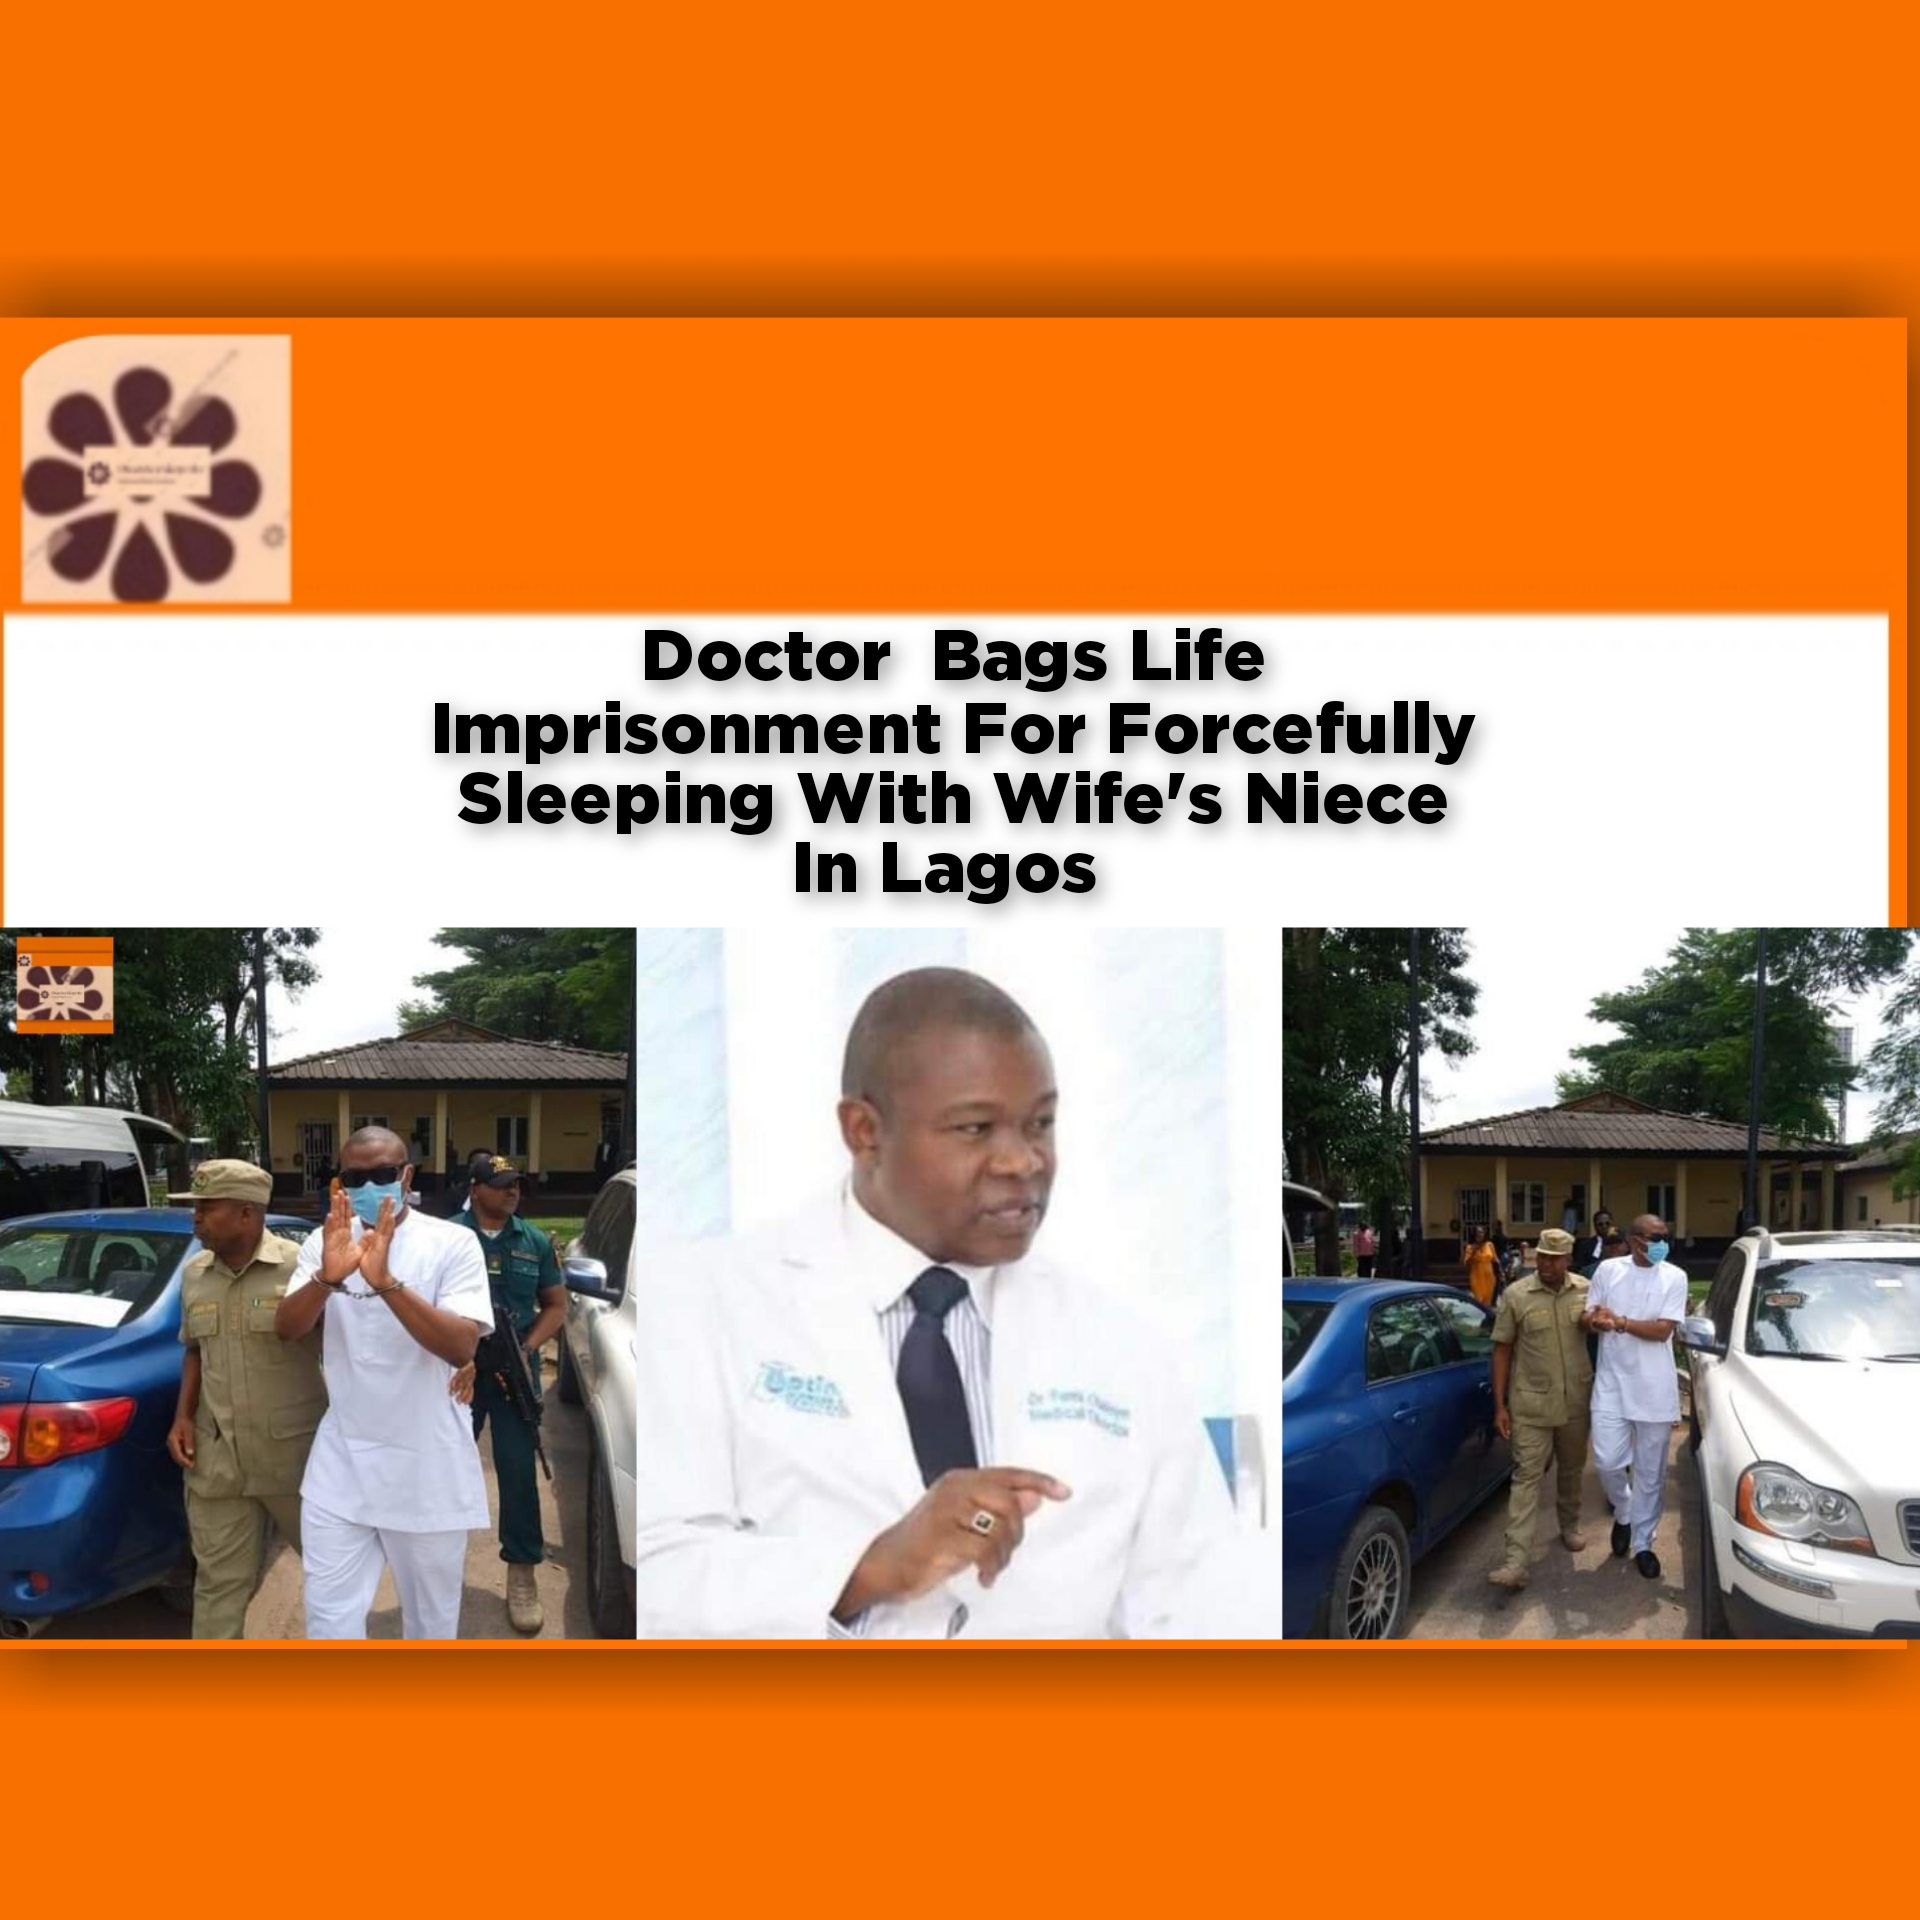 Doctor Bags Life Imprisonment For Forcefully Sleeping With Wife's Niece In Lagos ~ OsazuwaAkonedo #Doctor #Lagos #Olufemi #Rape